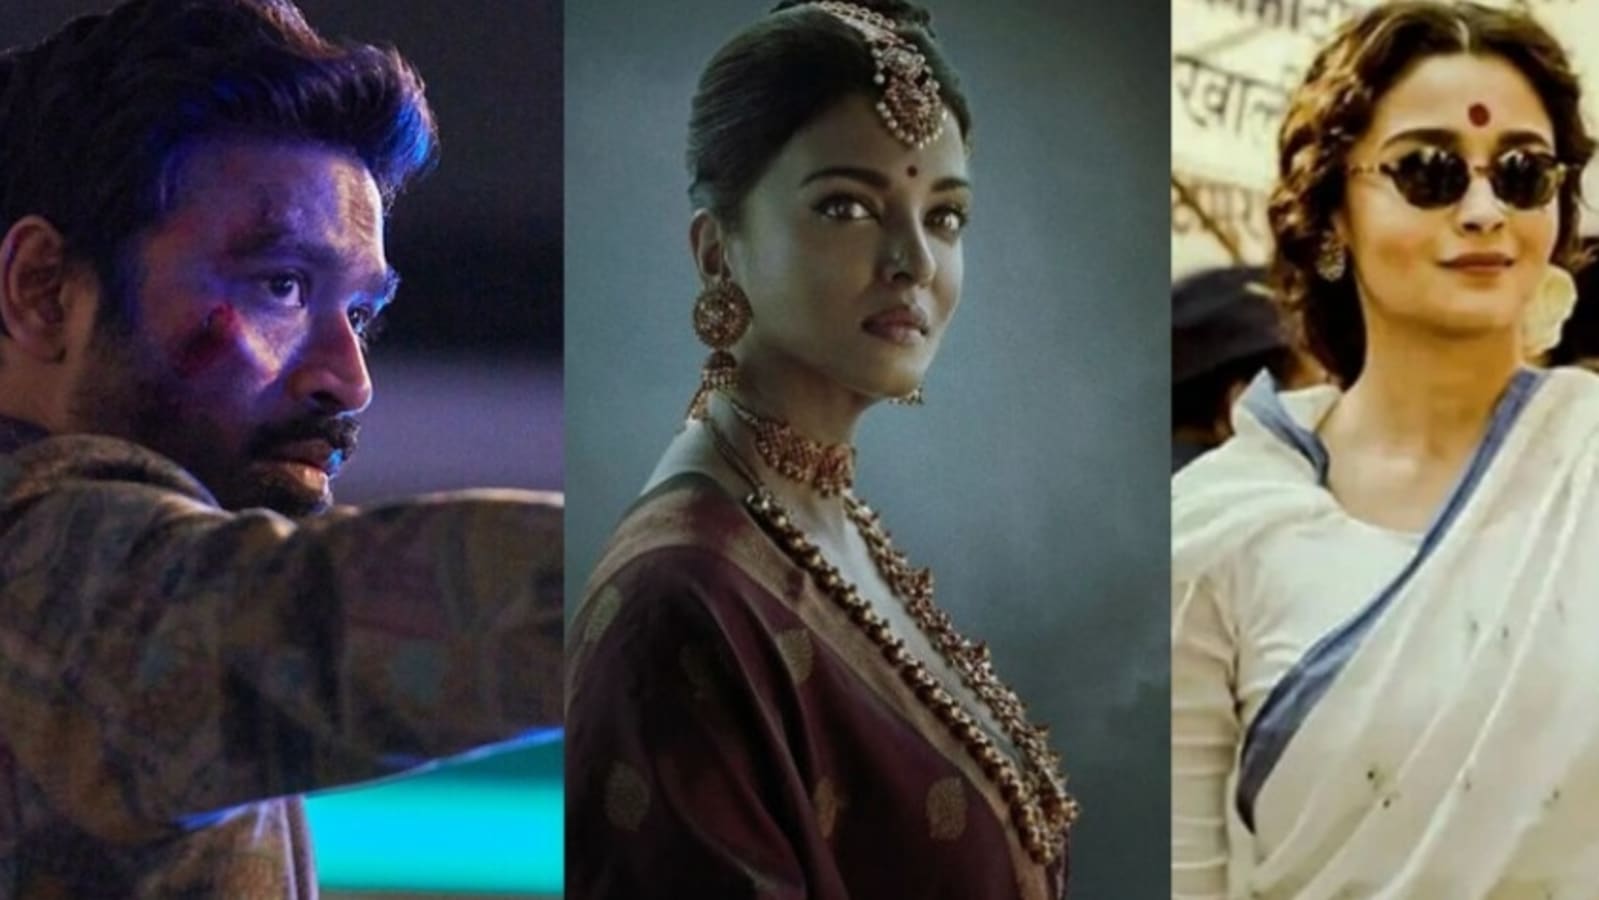 IMDb Announces the Most Popular Indian Stars of 2022